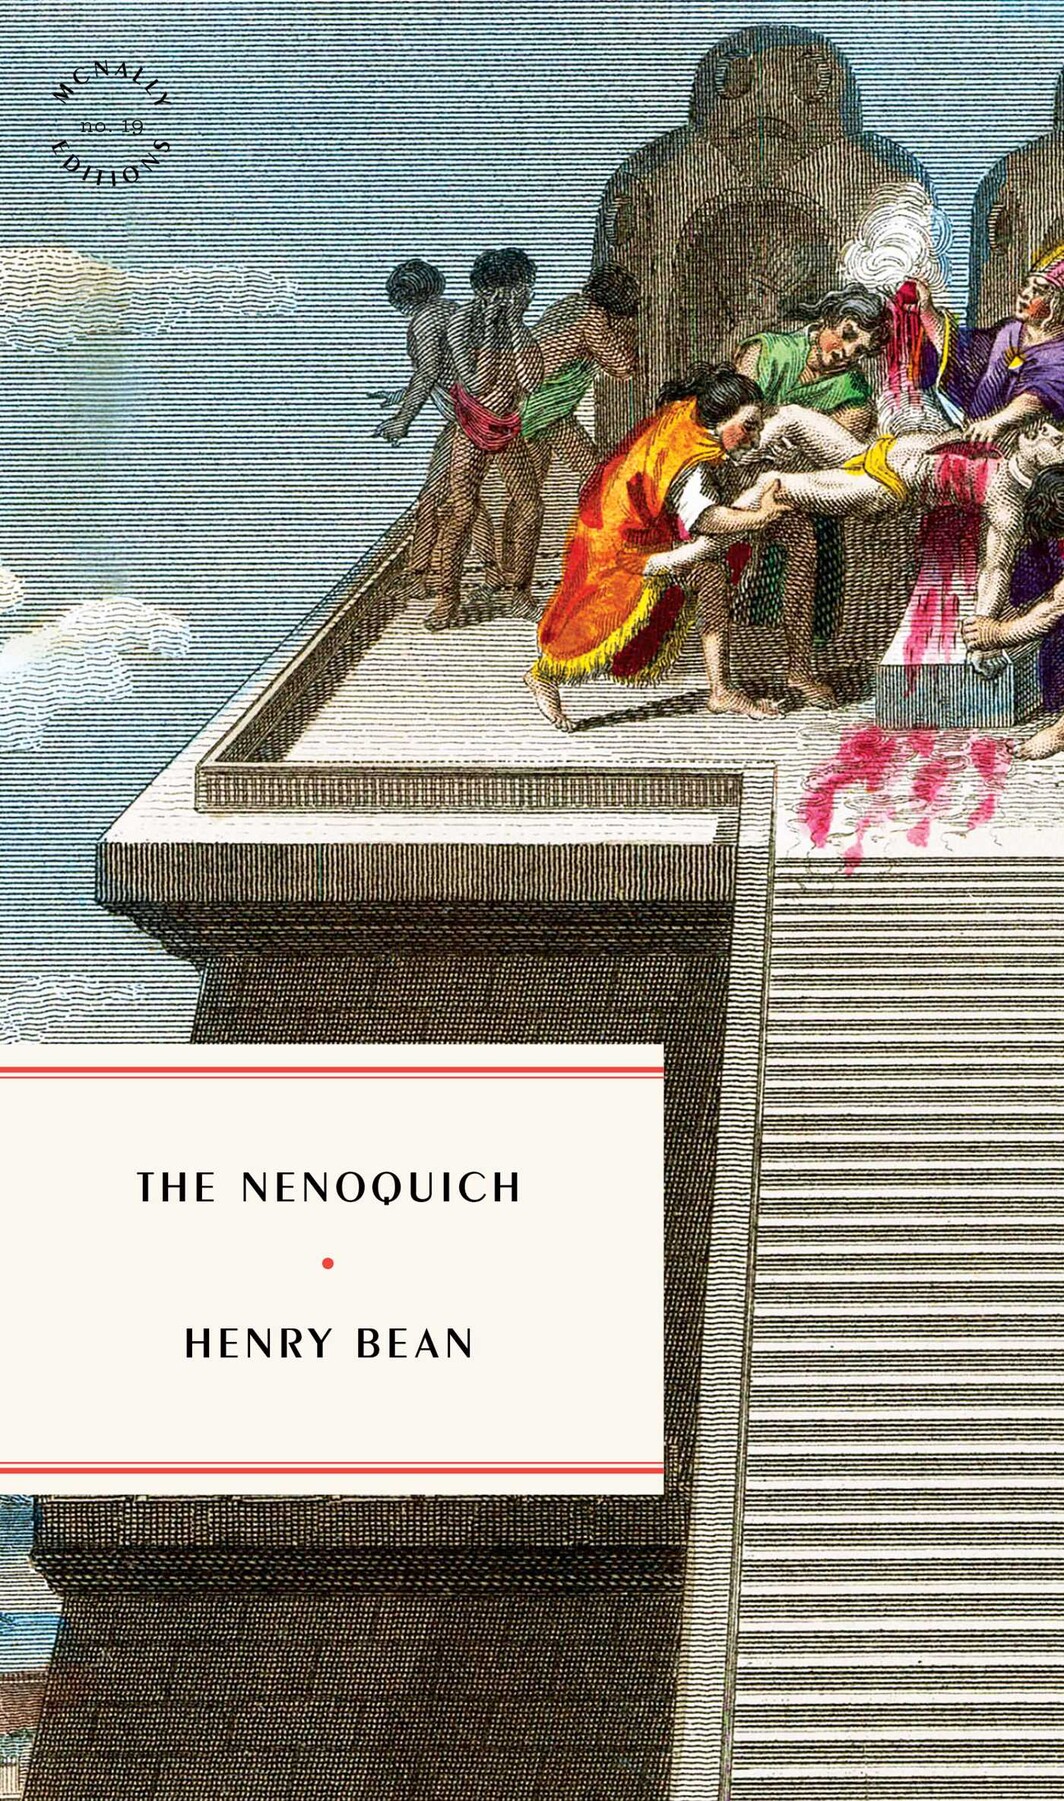 The cover of The Nenoquich